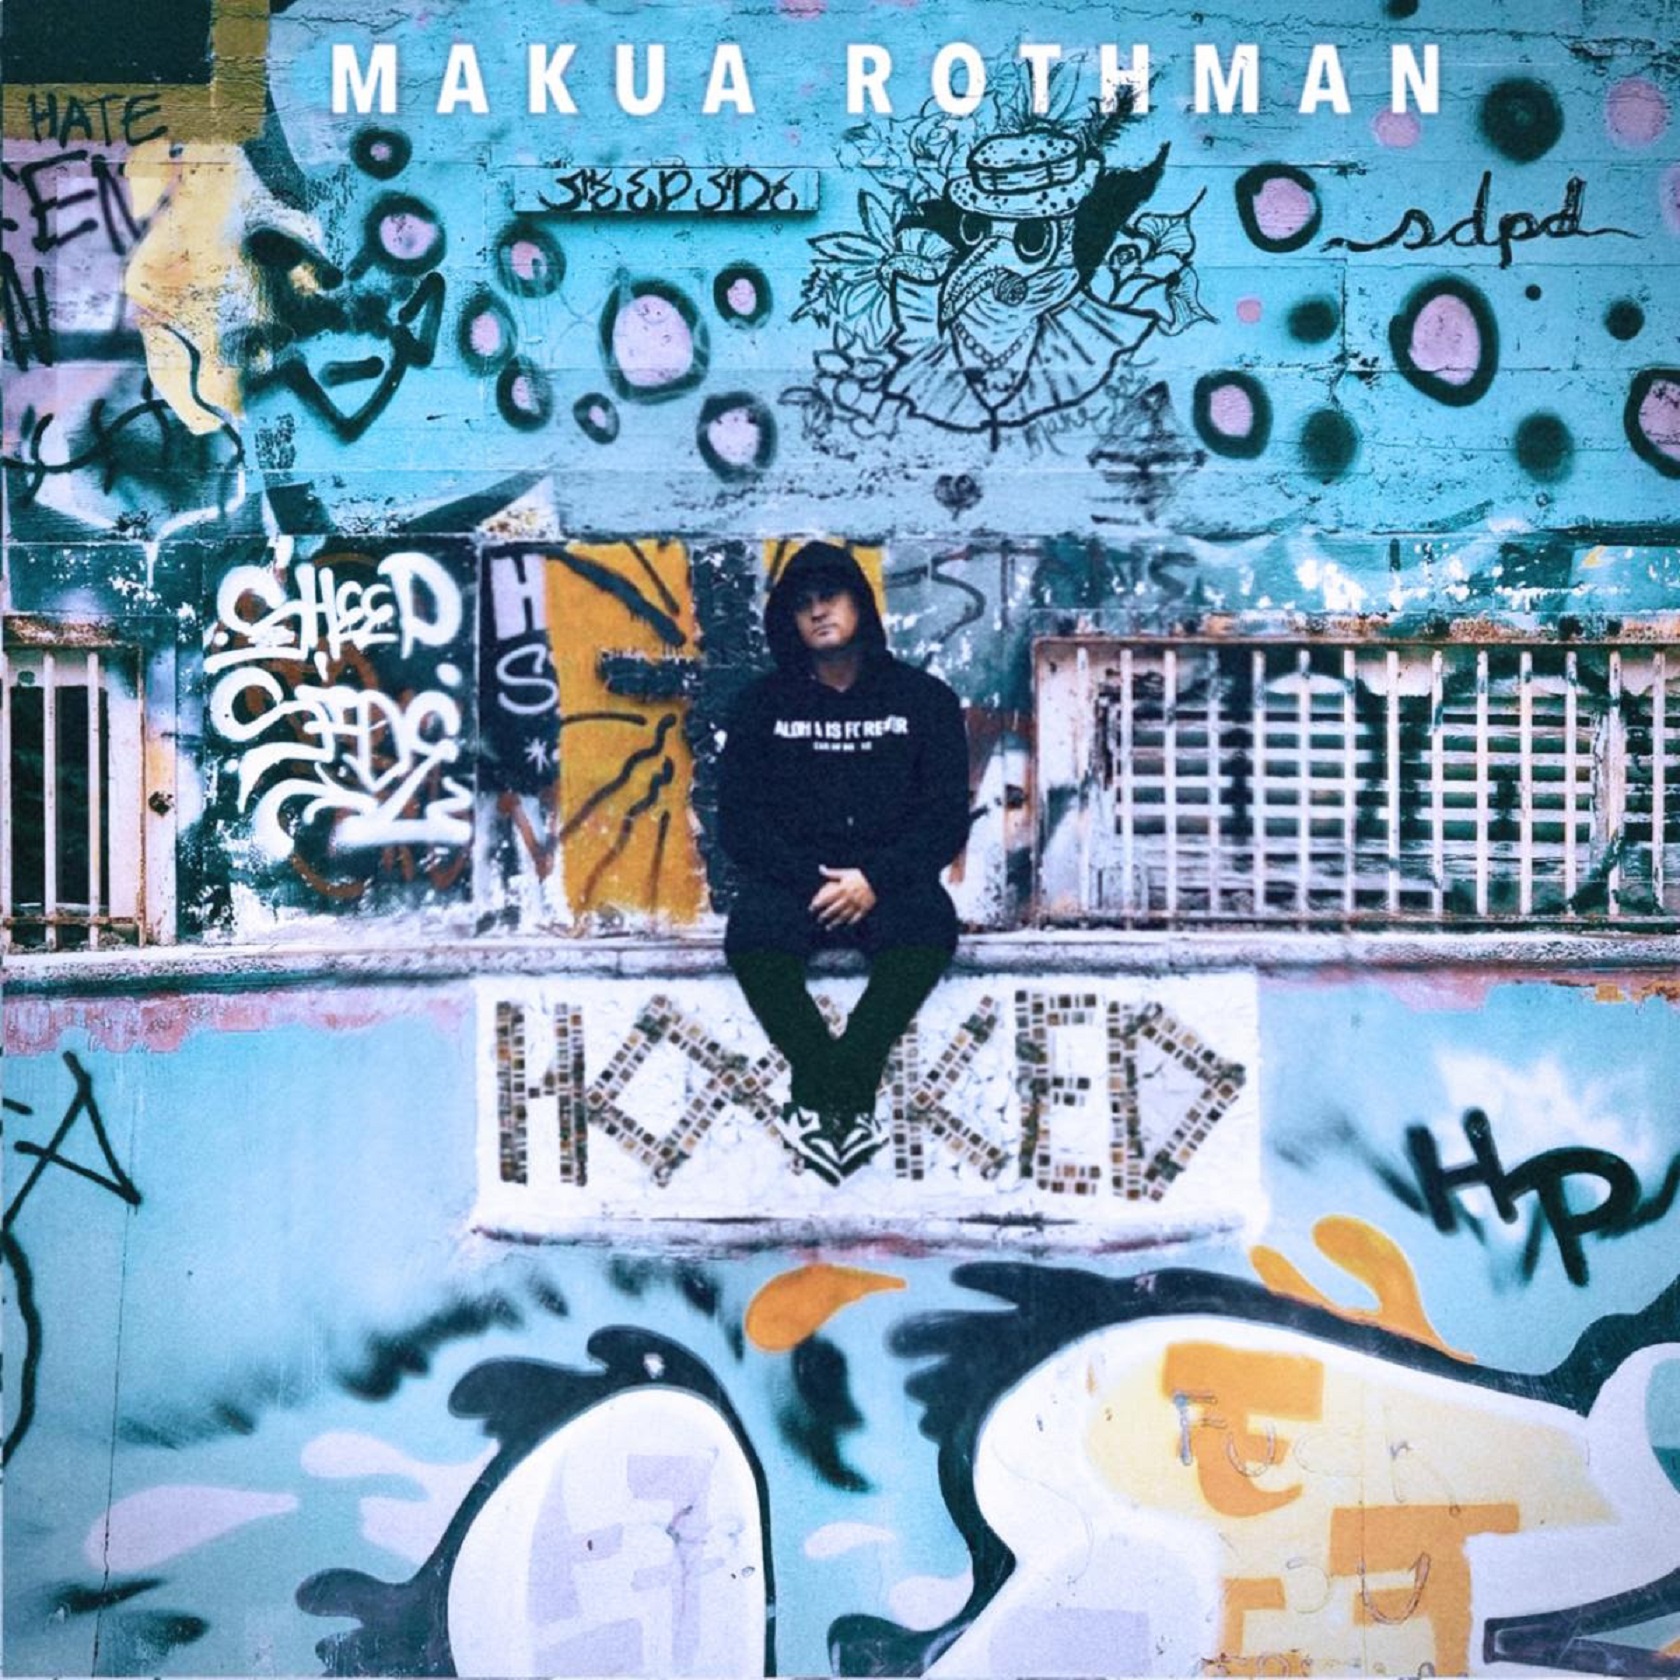 "HOOKED" by Makua Rothman: New Song Tells Redemption Story of Pro Surfer & Artist